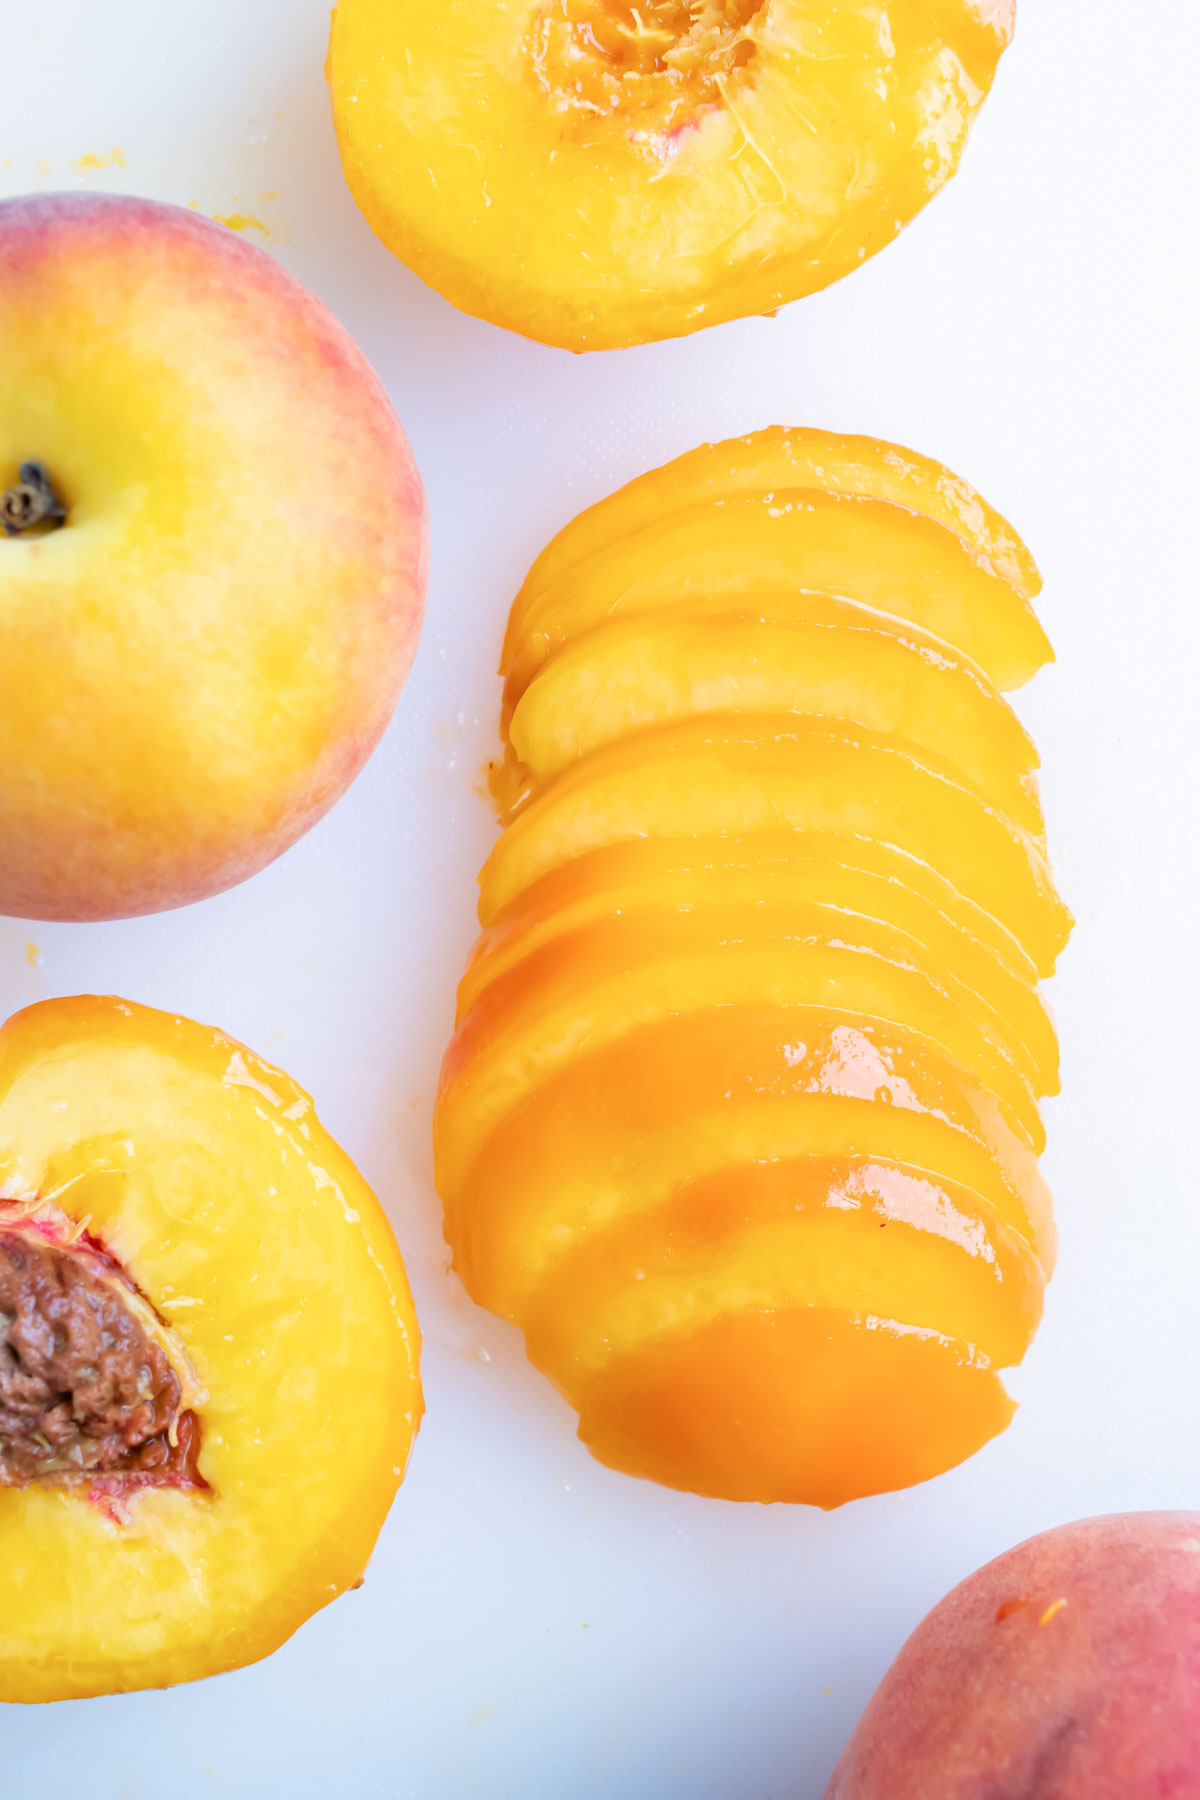 Peaches sit on the counter in various stages of being sliced.